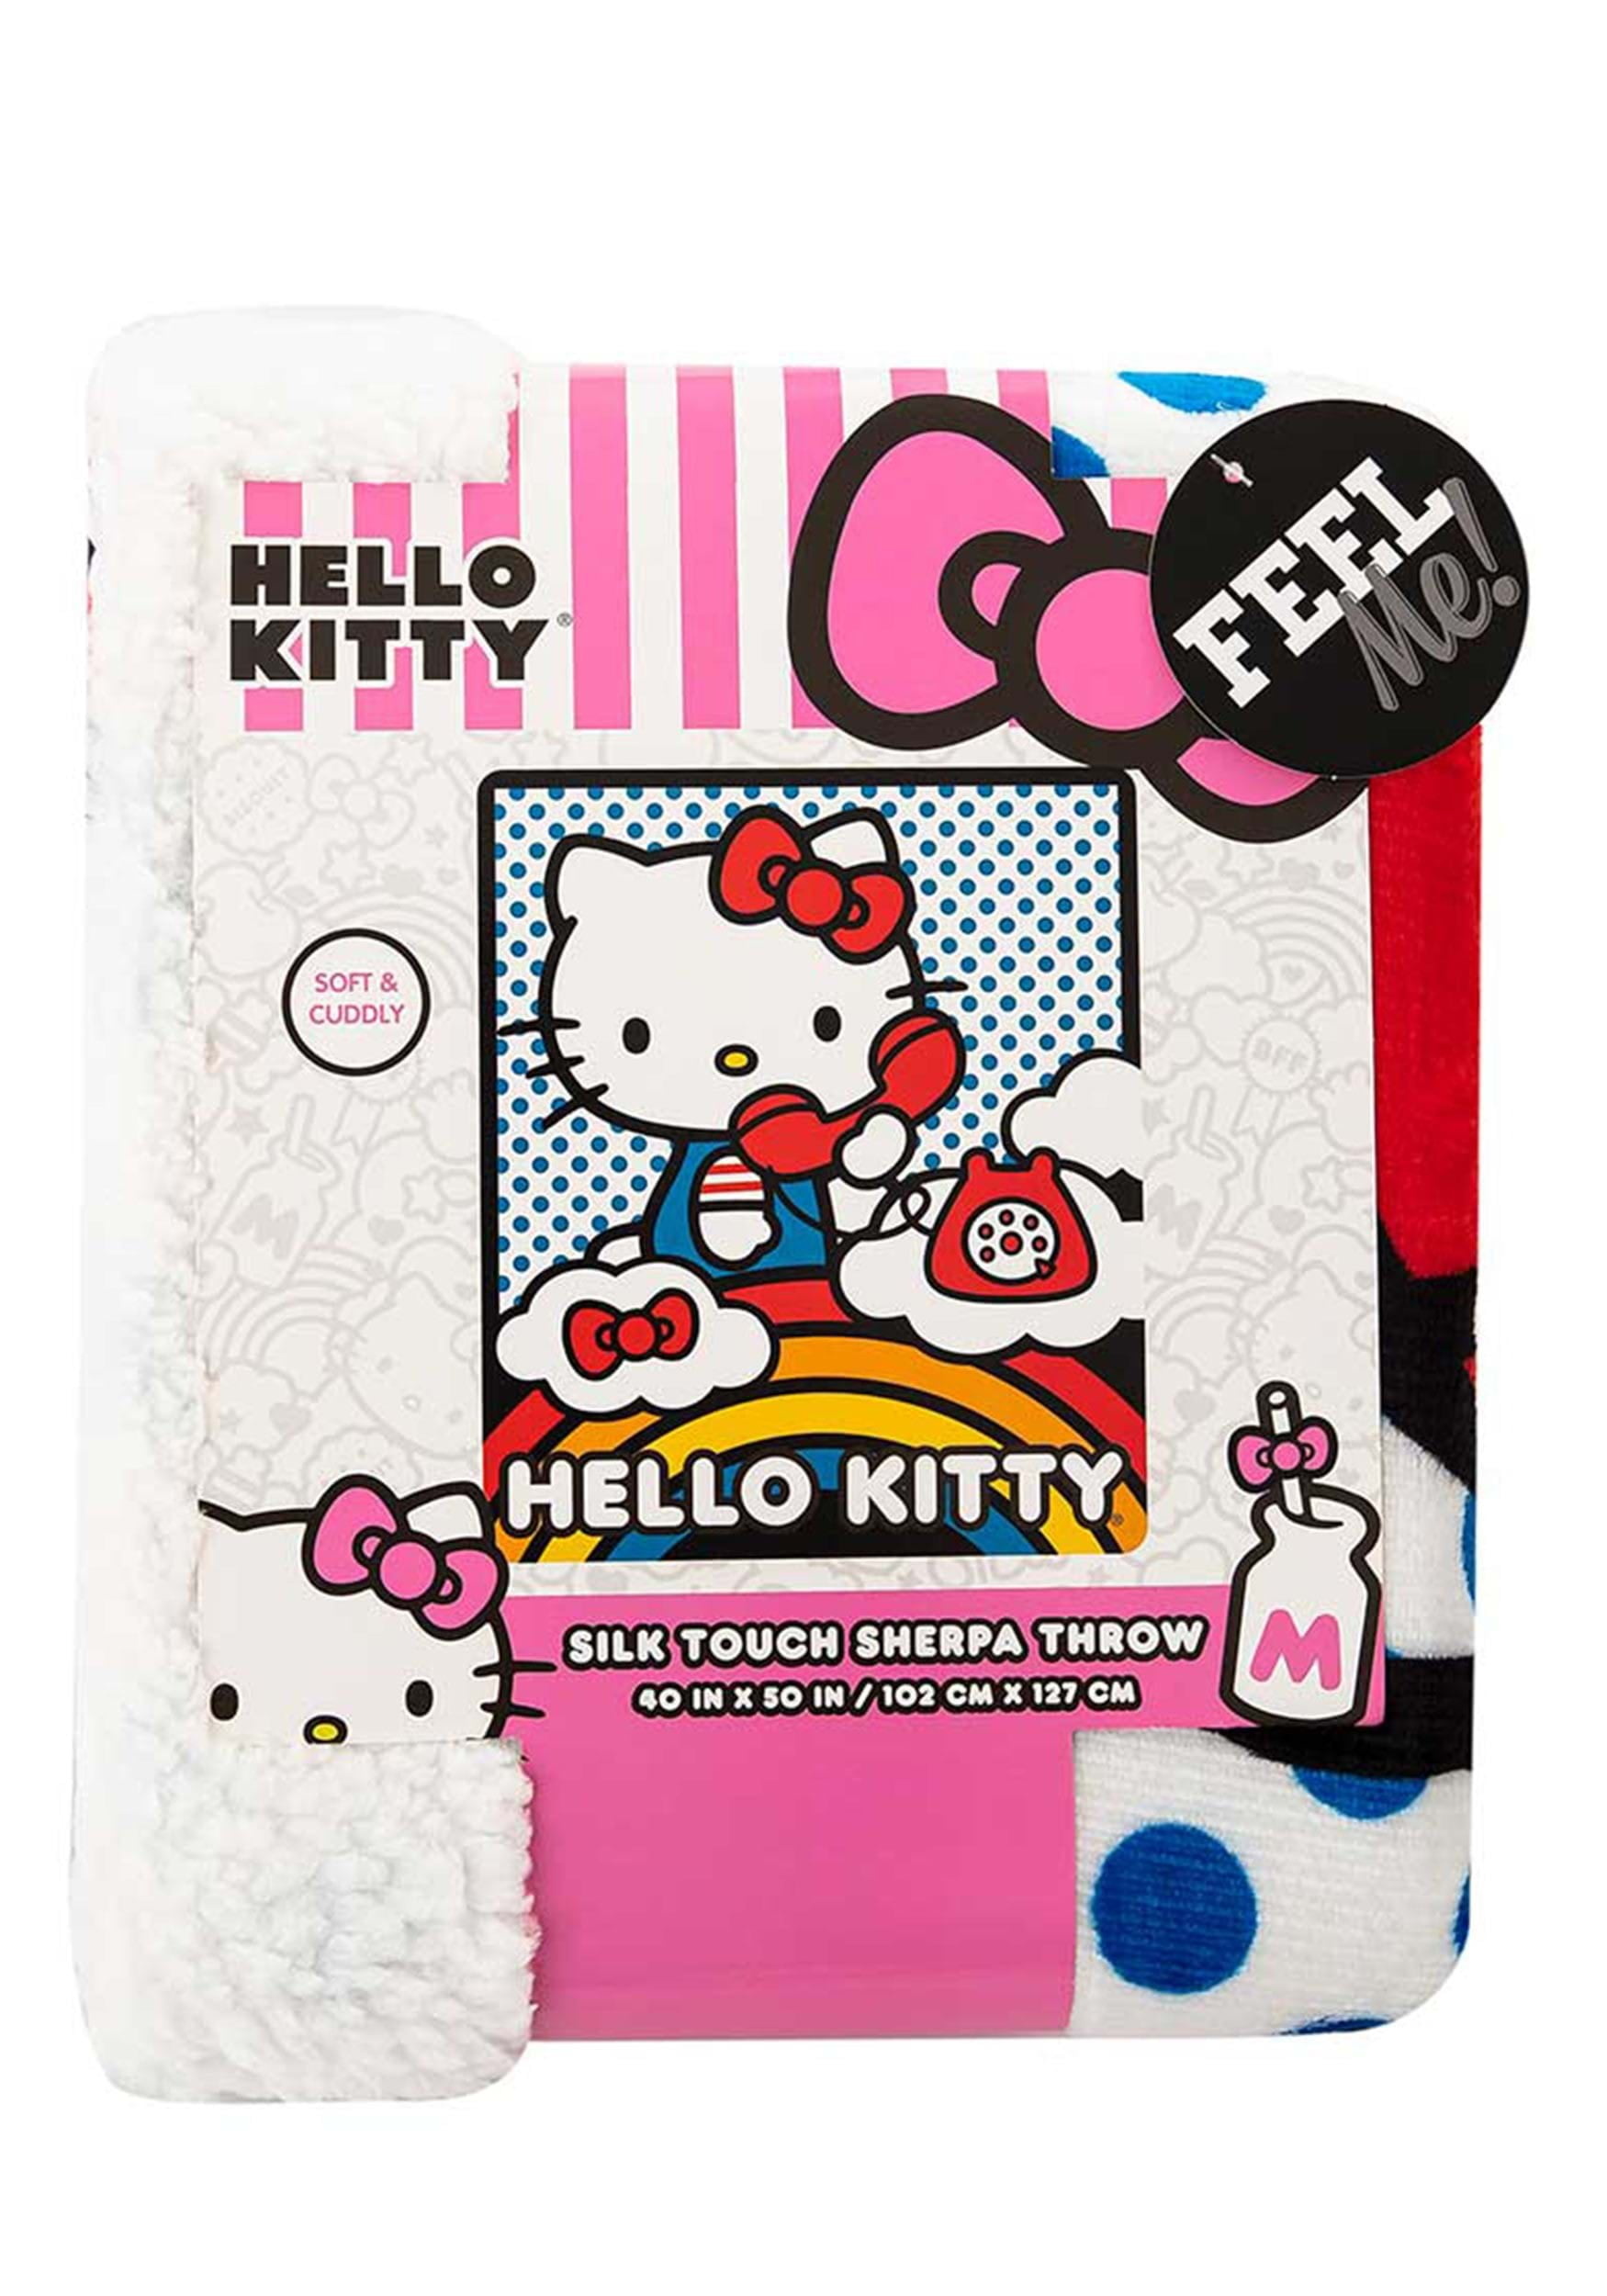 Hello Kitty Free Time standard size Sham pink by Sanrio 20" x 30" 